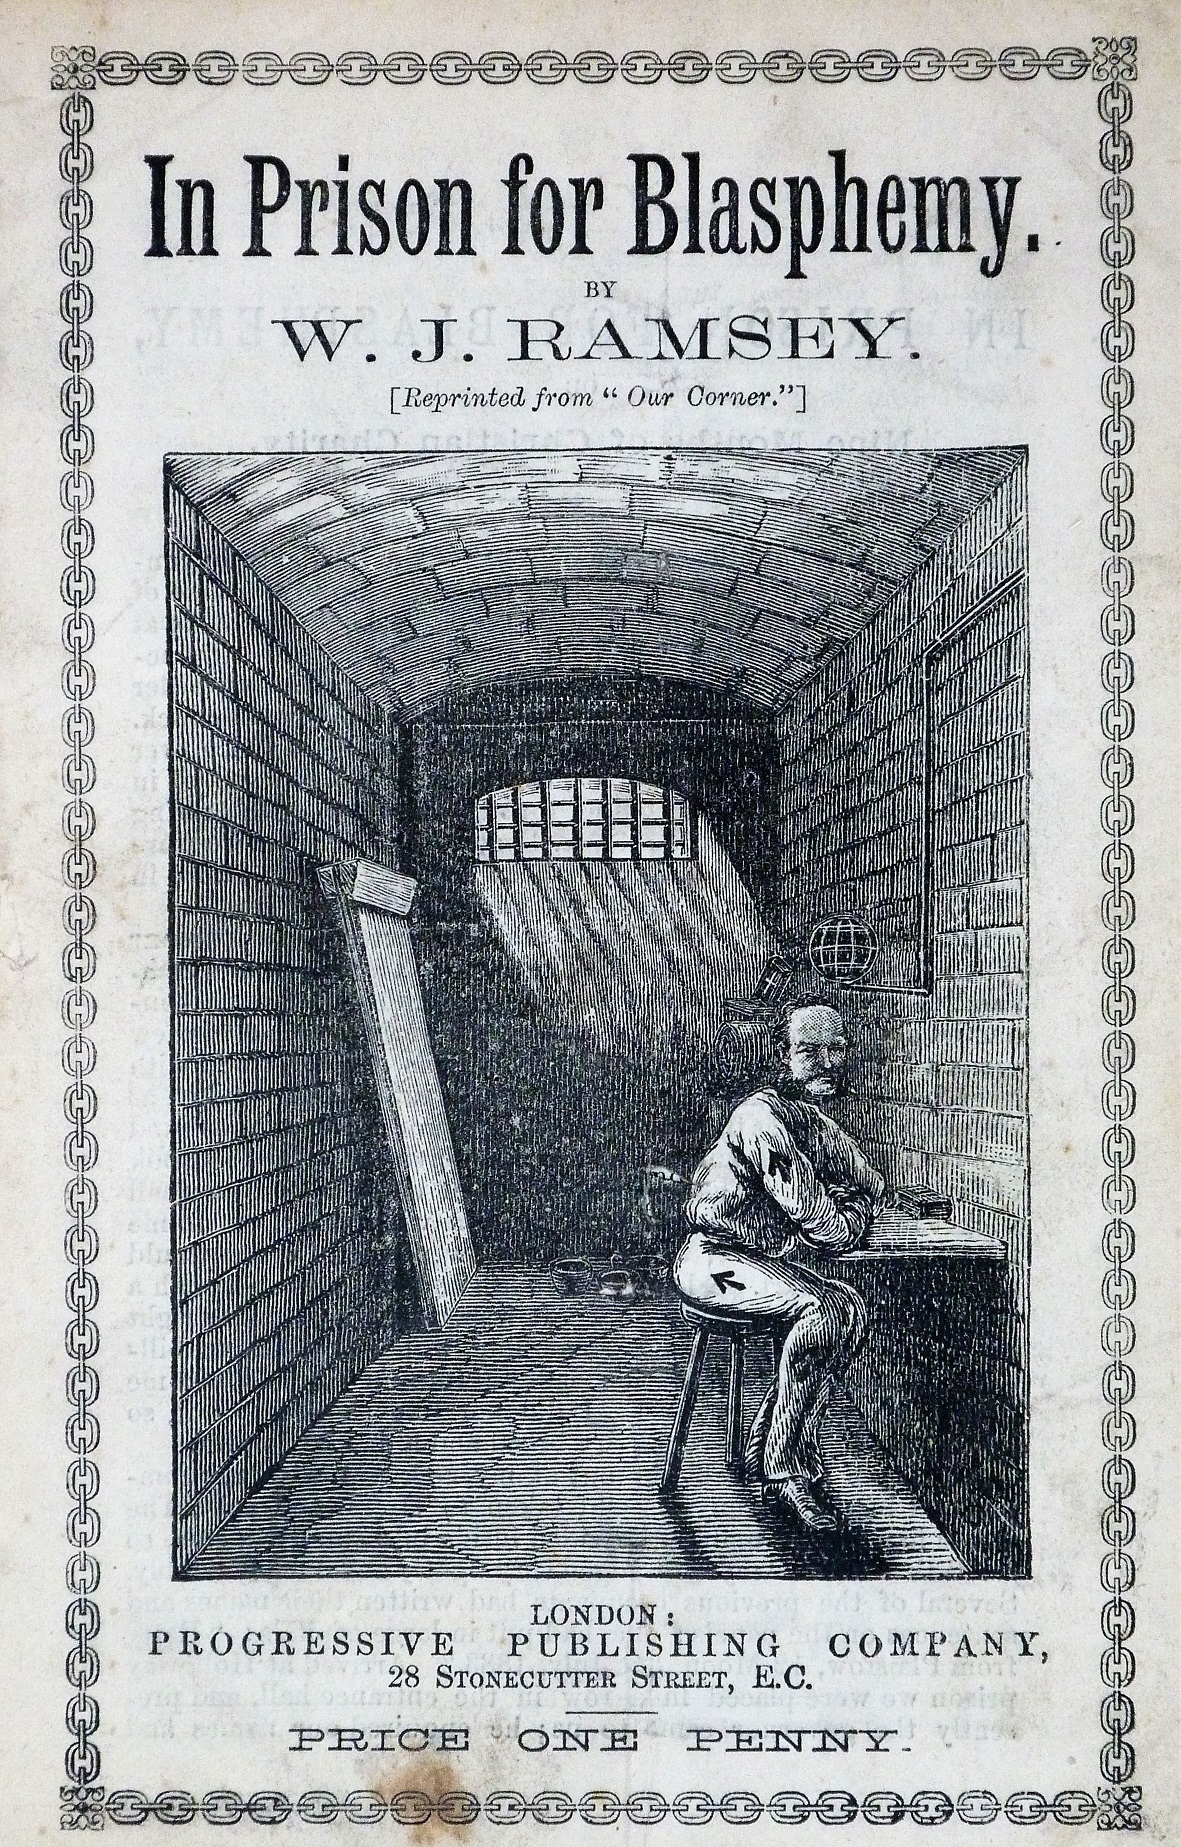 William Ramsay's account of his time in prison for blasphemy (blasphemy trials)